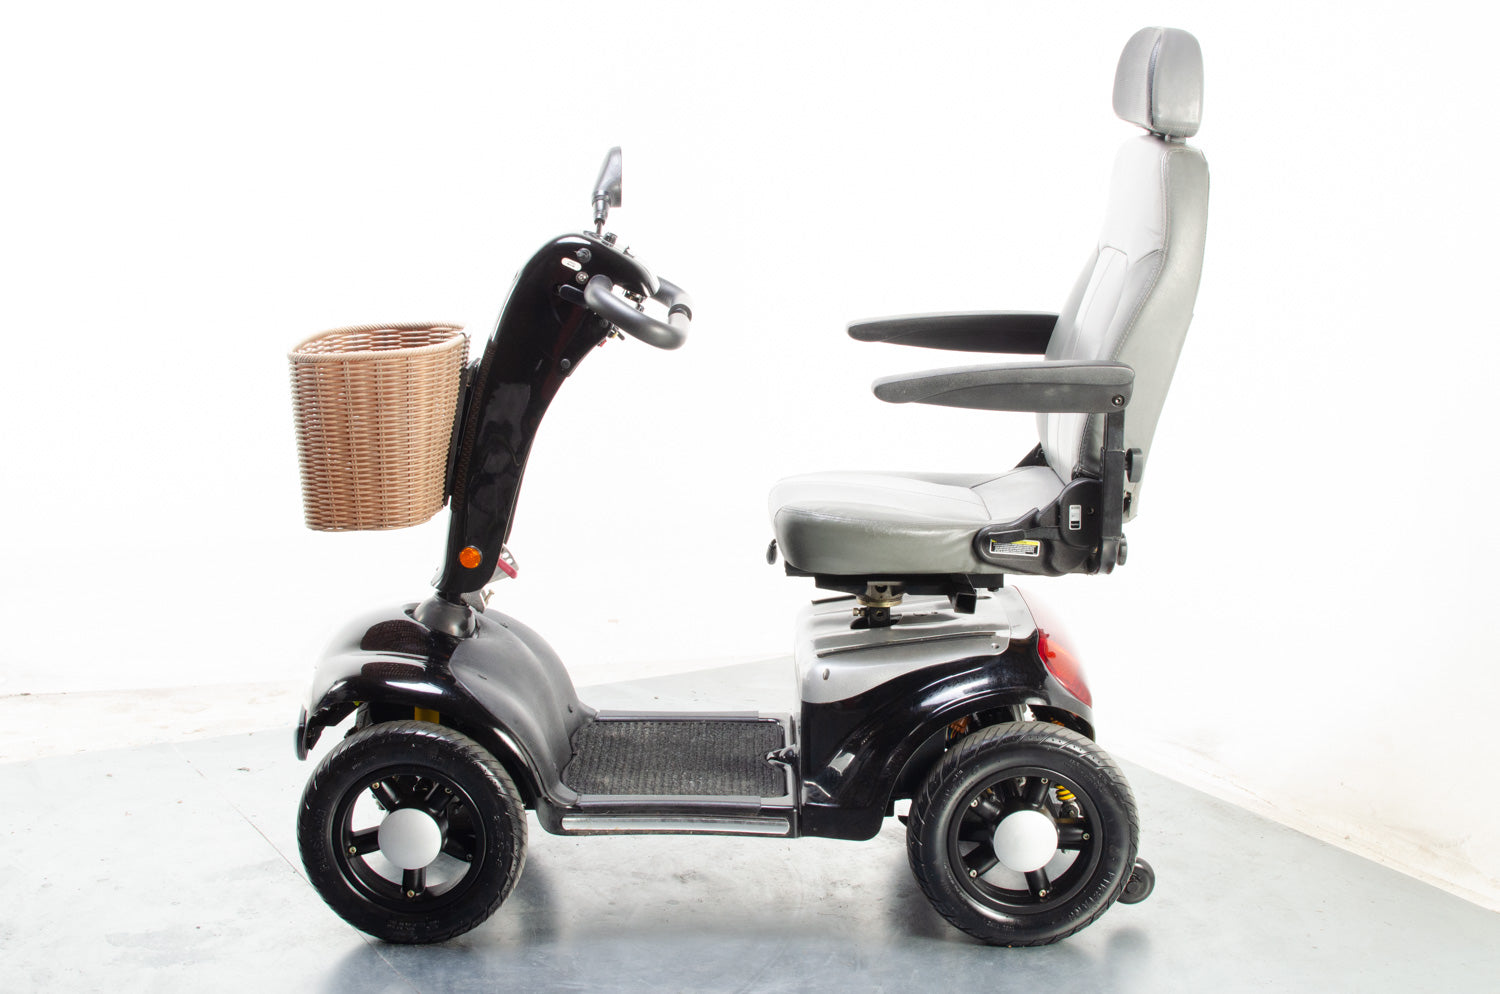 2012 Sterling Diamond 8mph Large Road Legal Mobility Scooter from Sunrise Medical